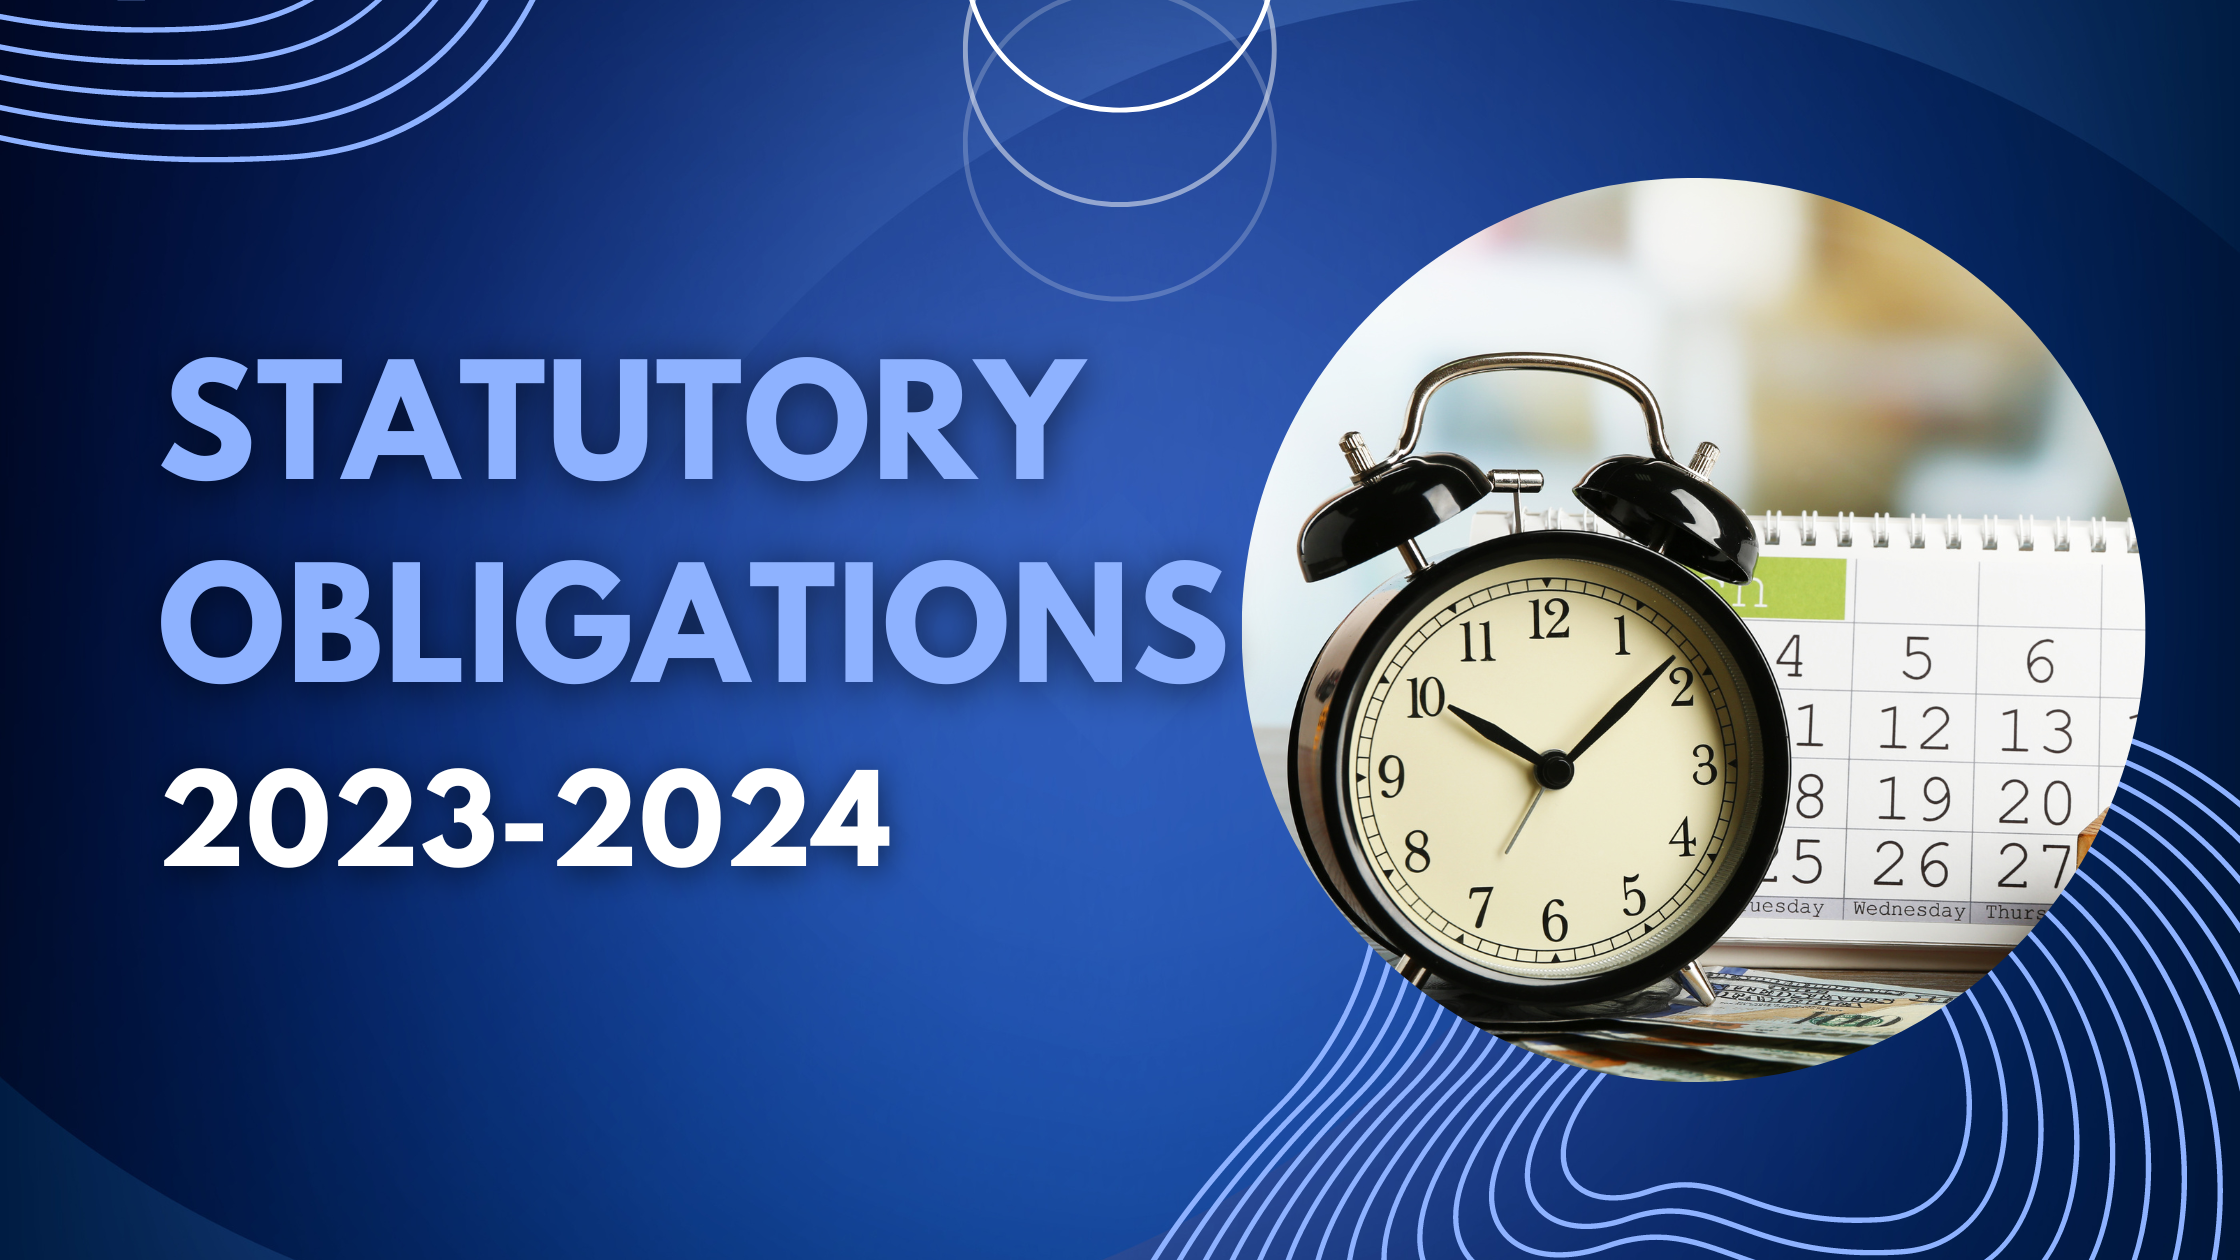 Statutory and Tax Compliance Calendar for the Financial Year 2023-2024